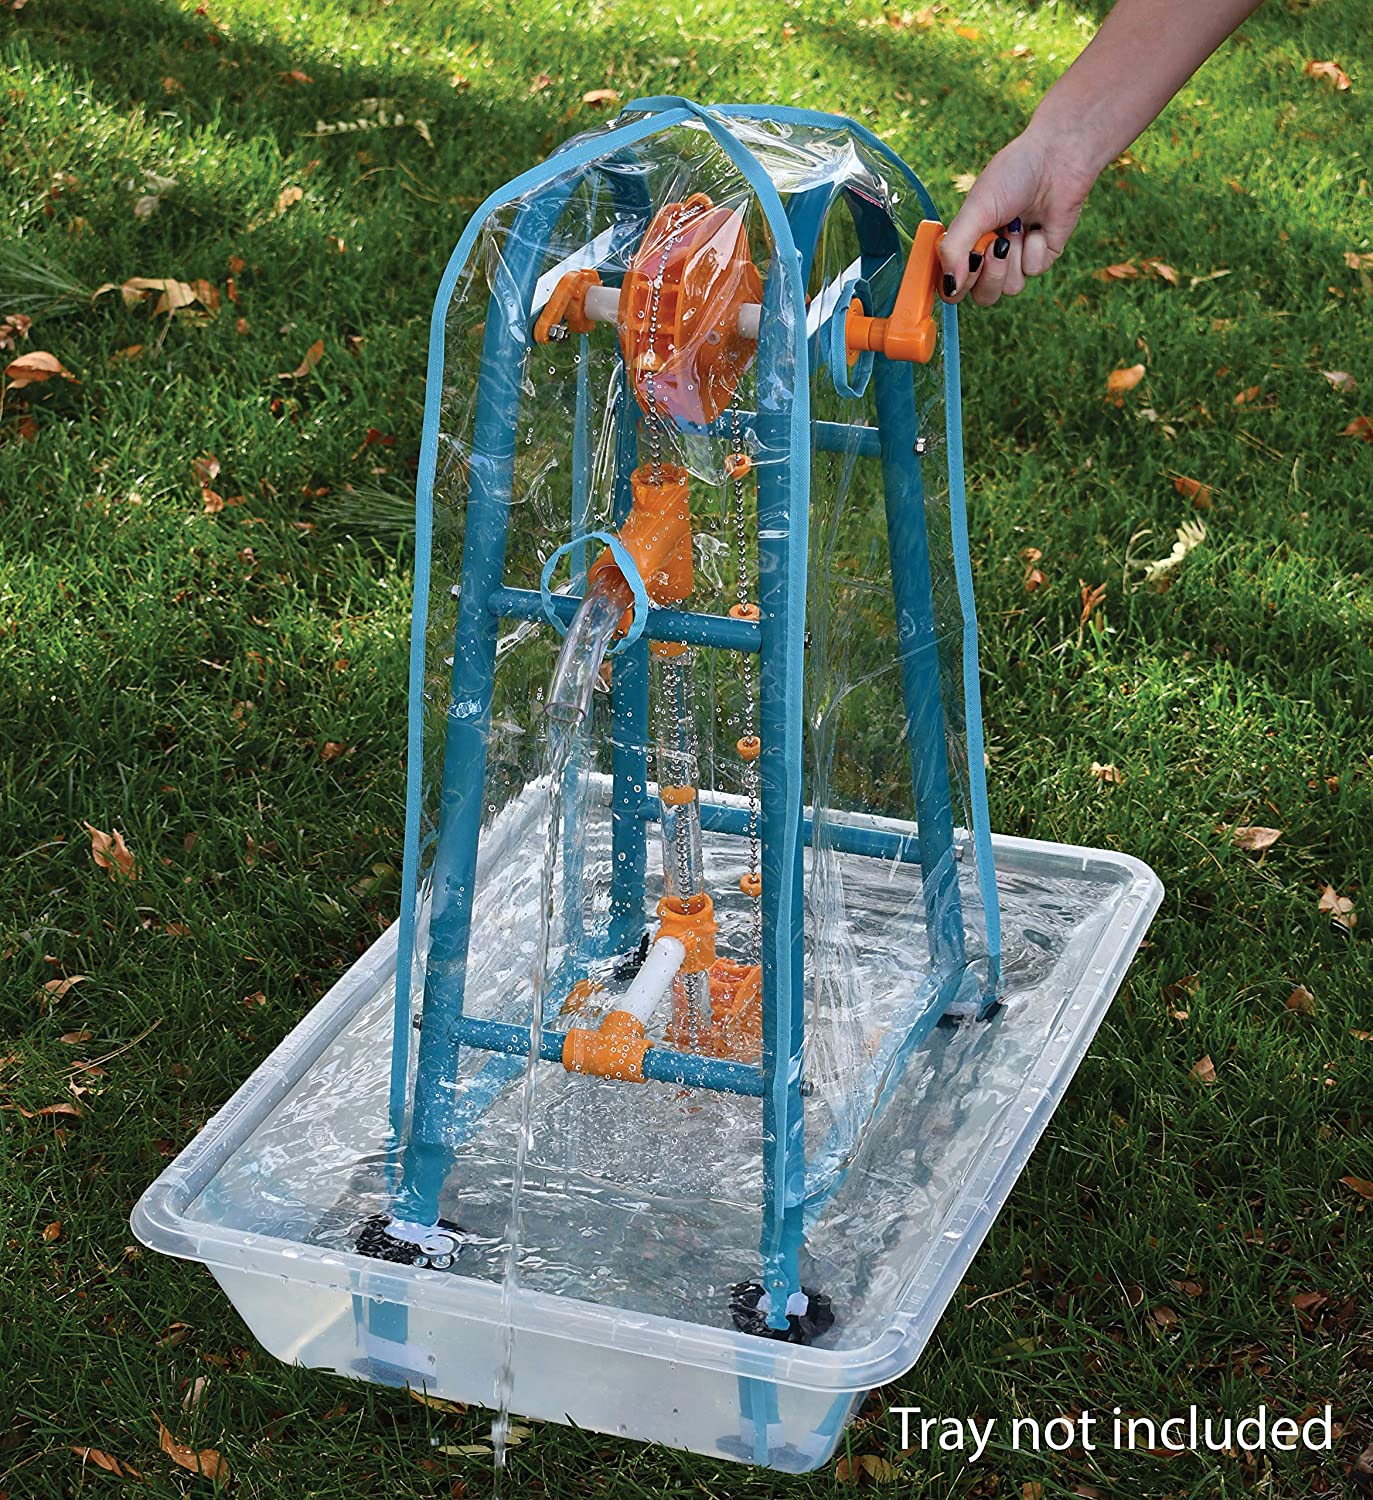 LEARNING ADVANTAGE Giant Water Pump - Hand-Operated Water Toy - For Ages 3+ - Indoor Or Outdoor Use, Blue and Orange